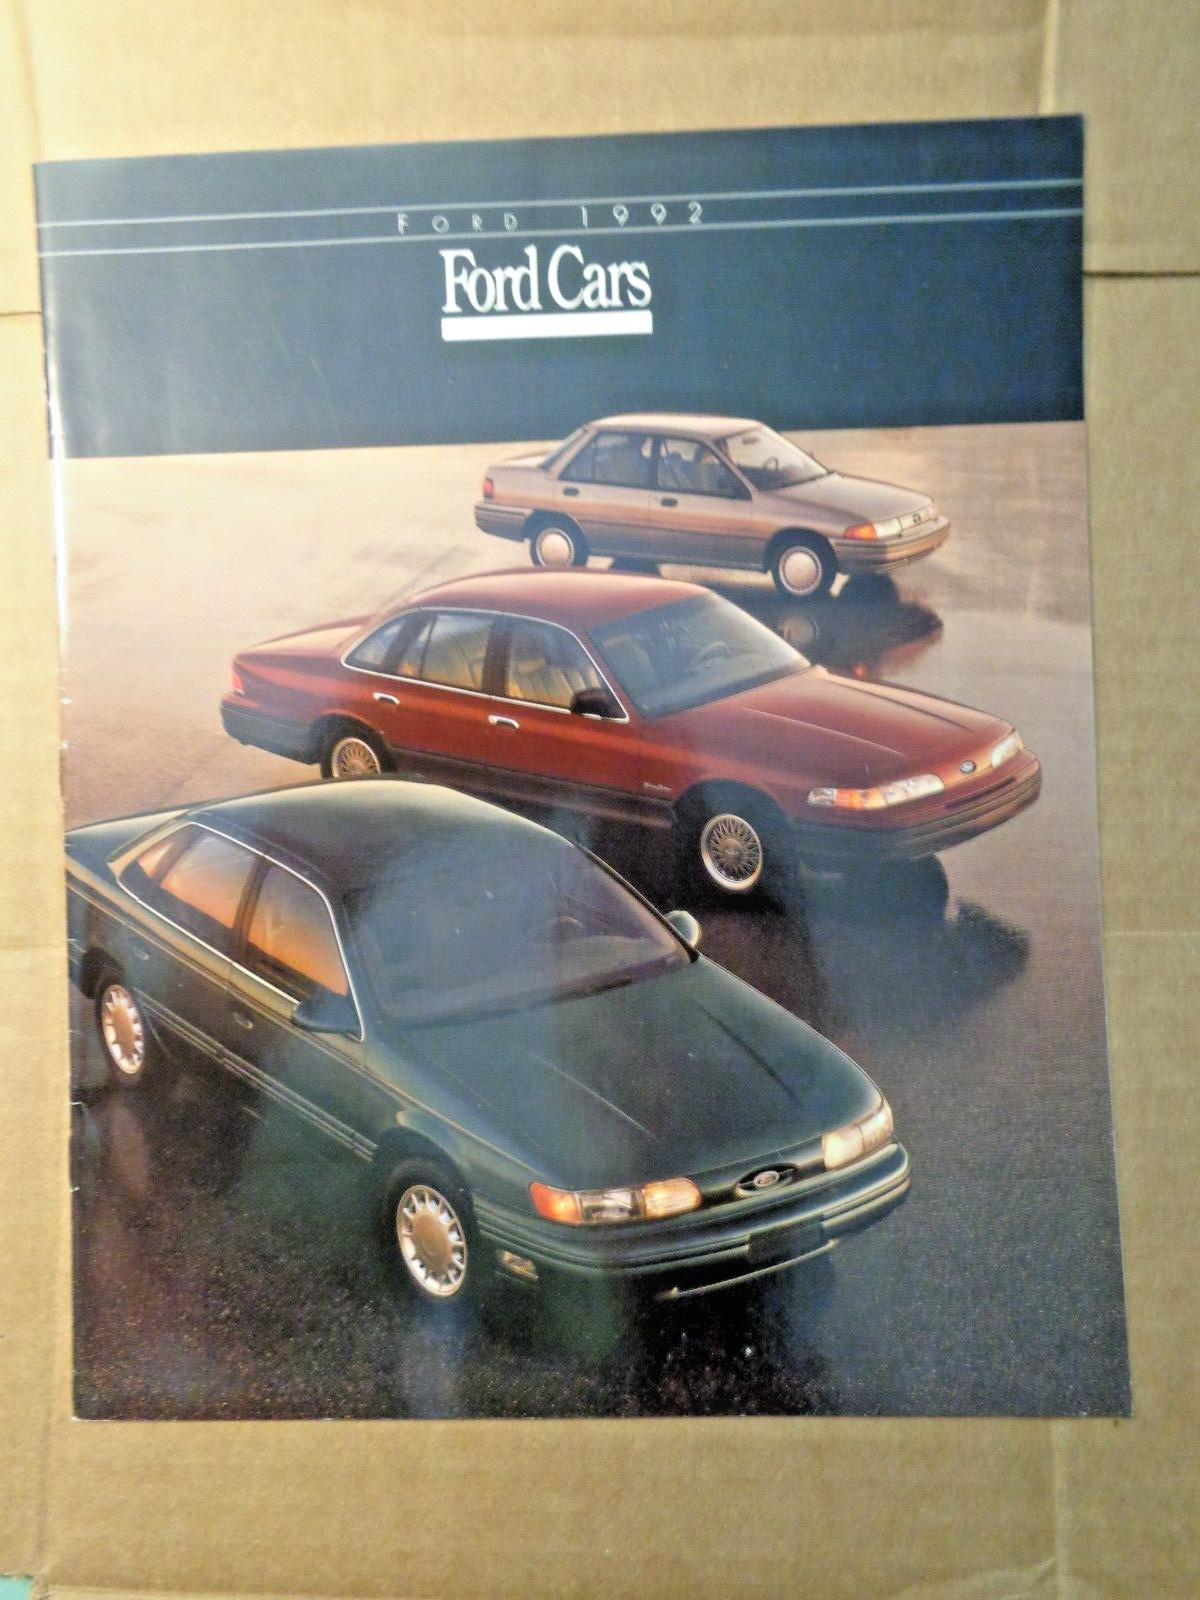 1992 FORD CARS - 16 PAGES